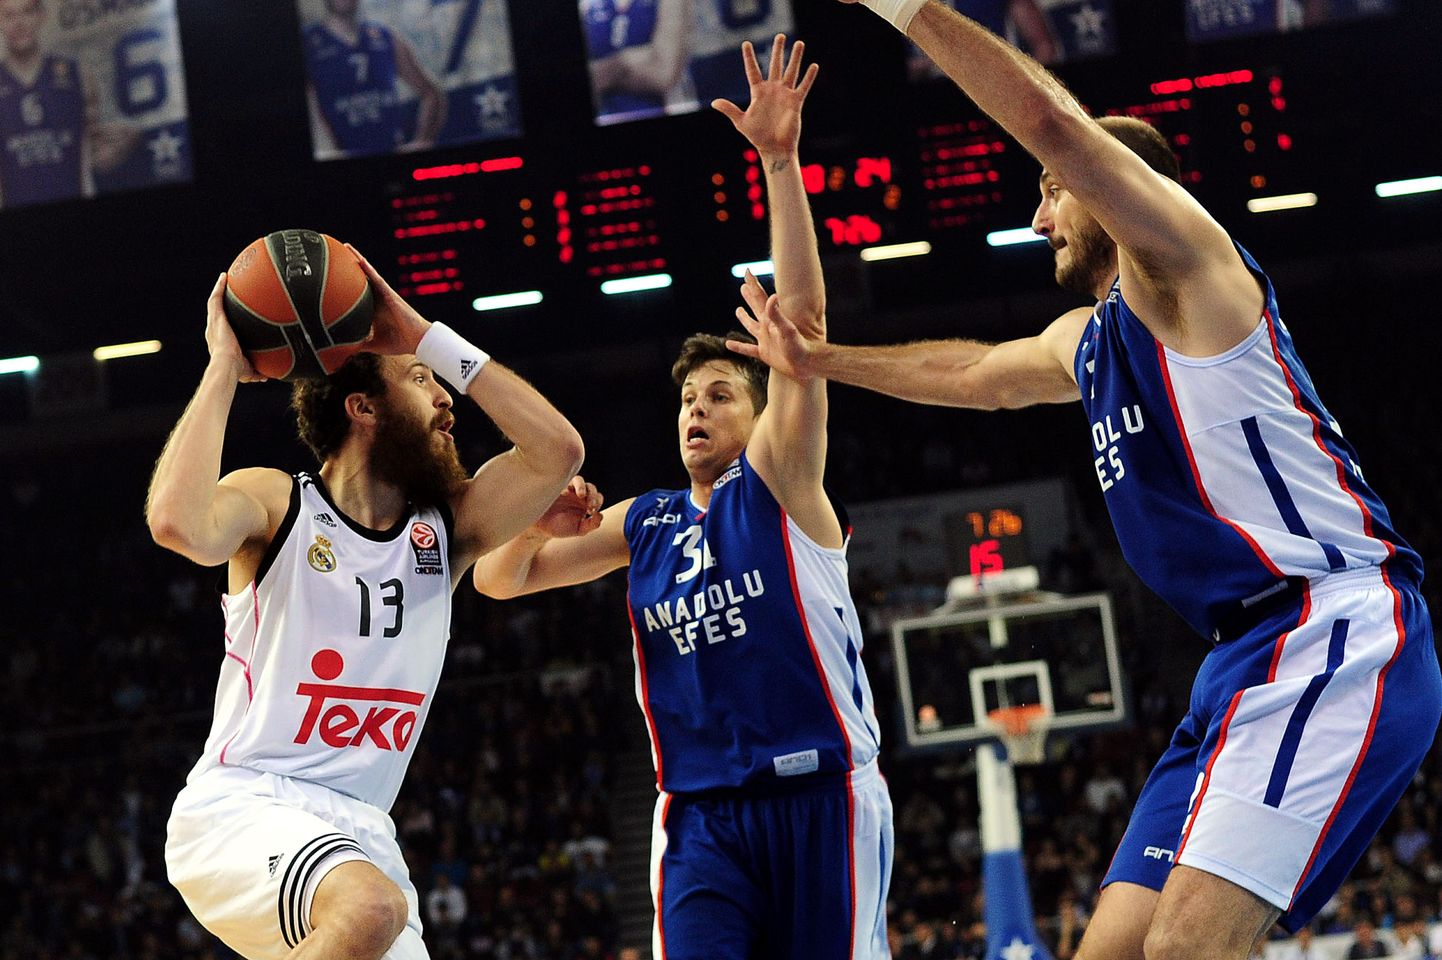 Real Madrid's guard Sergio Rodriguez (L) vies with Anadolu Efes's Serbian guard Nenad Krstic (R) and French guard Thomas Heurtel (C) during the Euroleague playoffs round 3 basketball match between Anadolu Efes and Real Madrid at Abdi Ipekci Arena in Istanbul on April 21, 2015. AFP PHOTO / OZAN KOSE